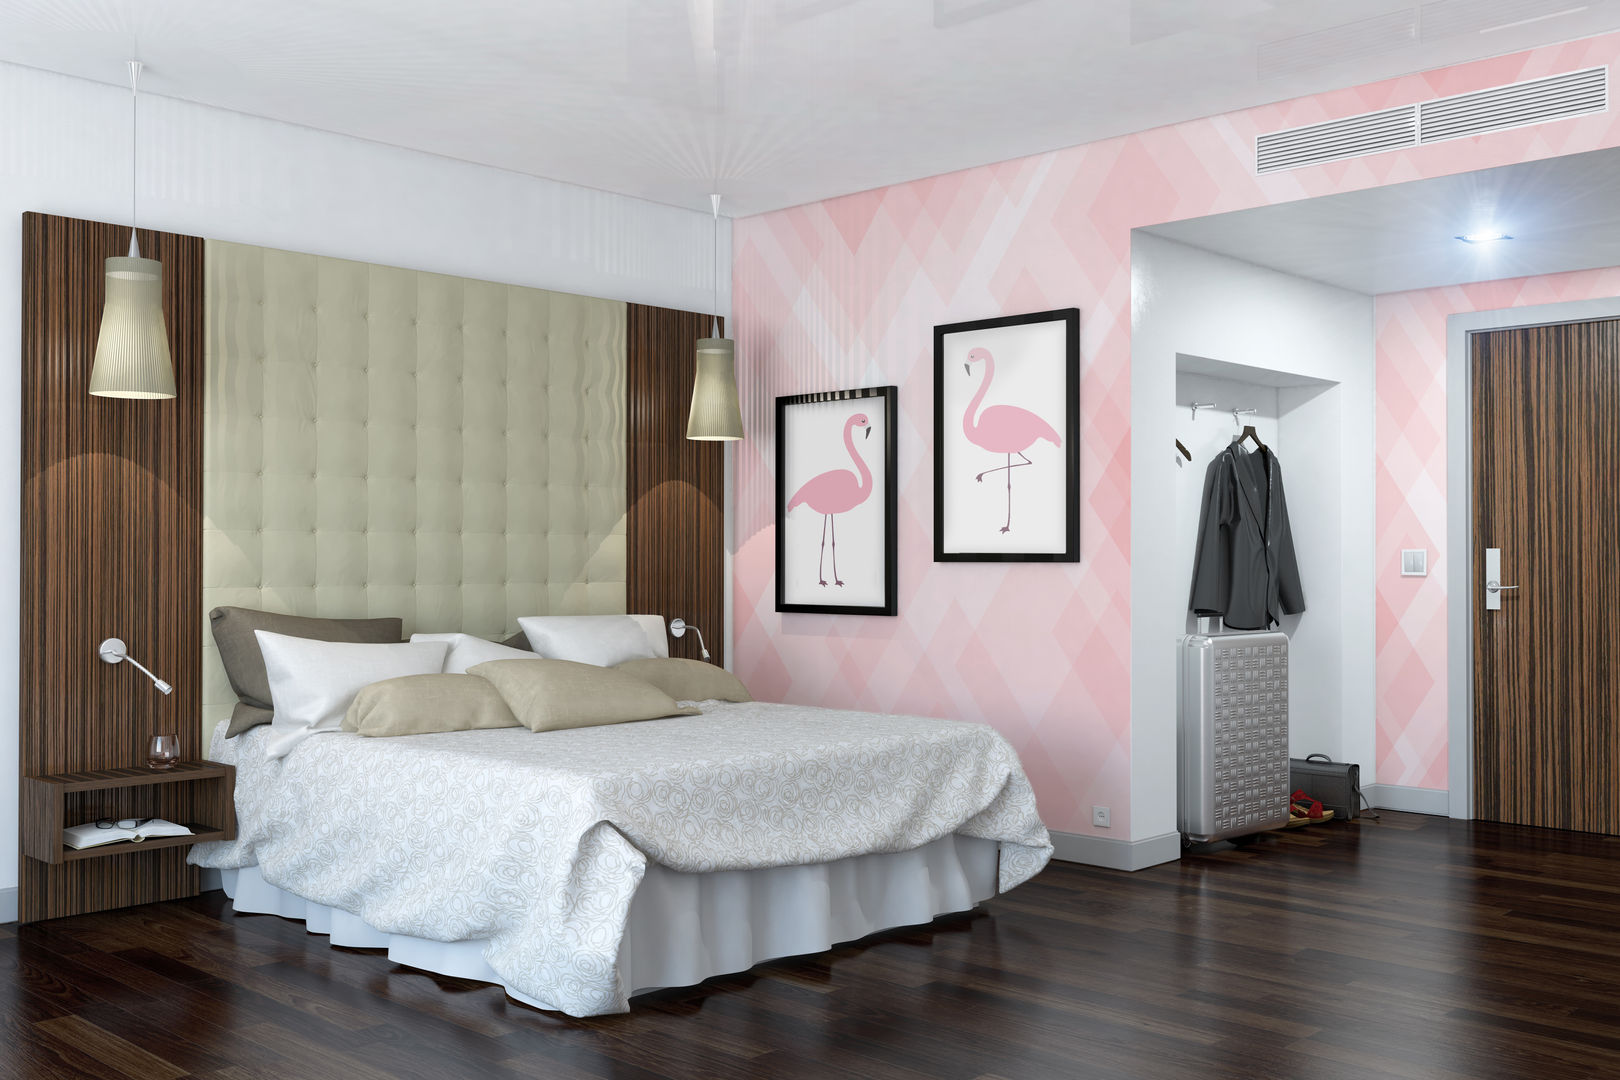 Flamingo Pixers Modern style bedroom wall mural,wallpaper,wall decal